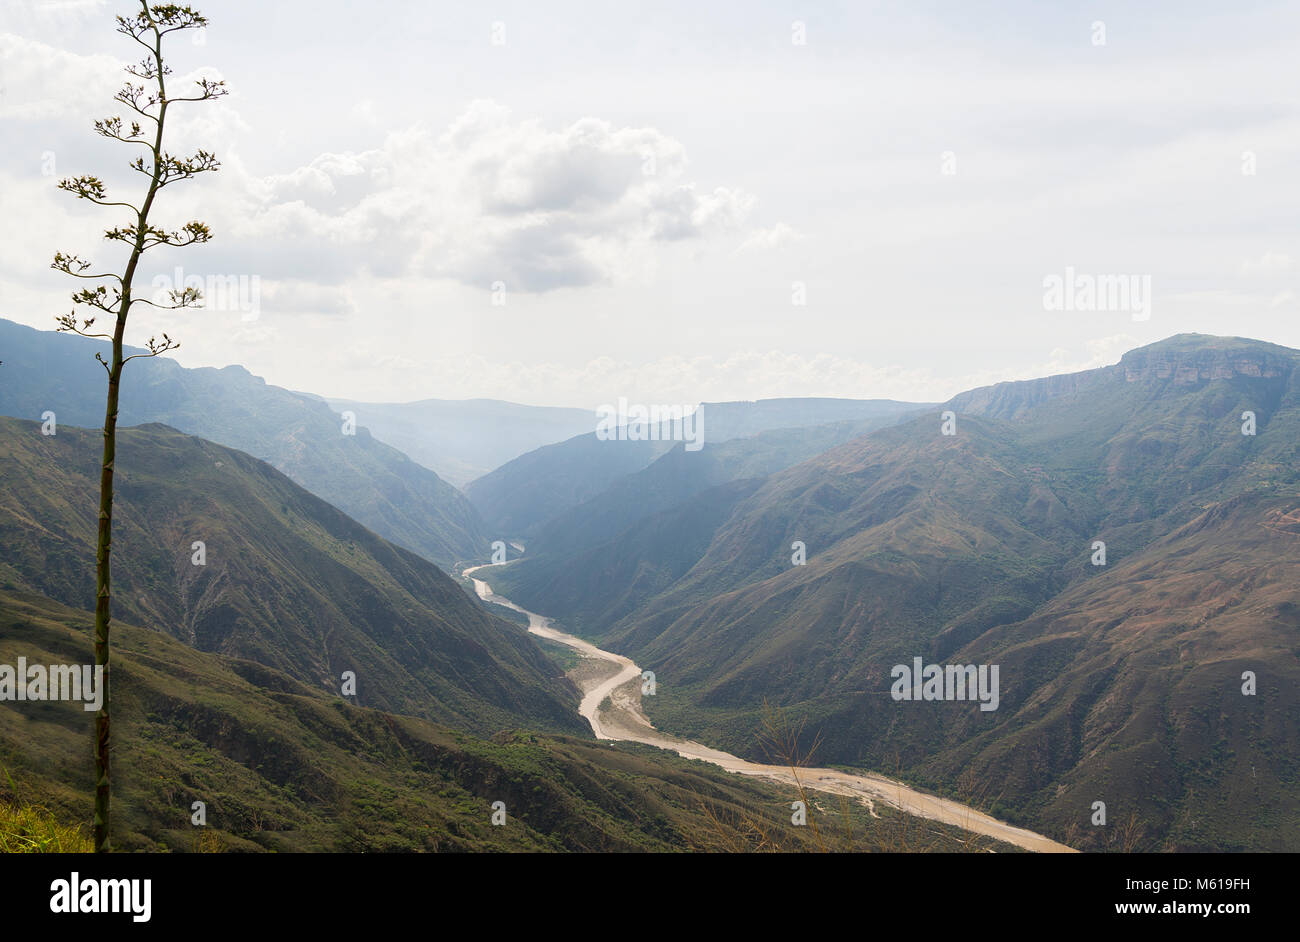 Walking around Chicamocha National Park in Colombia Stock Photo